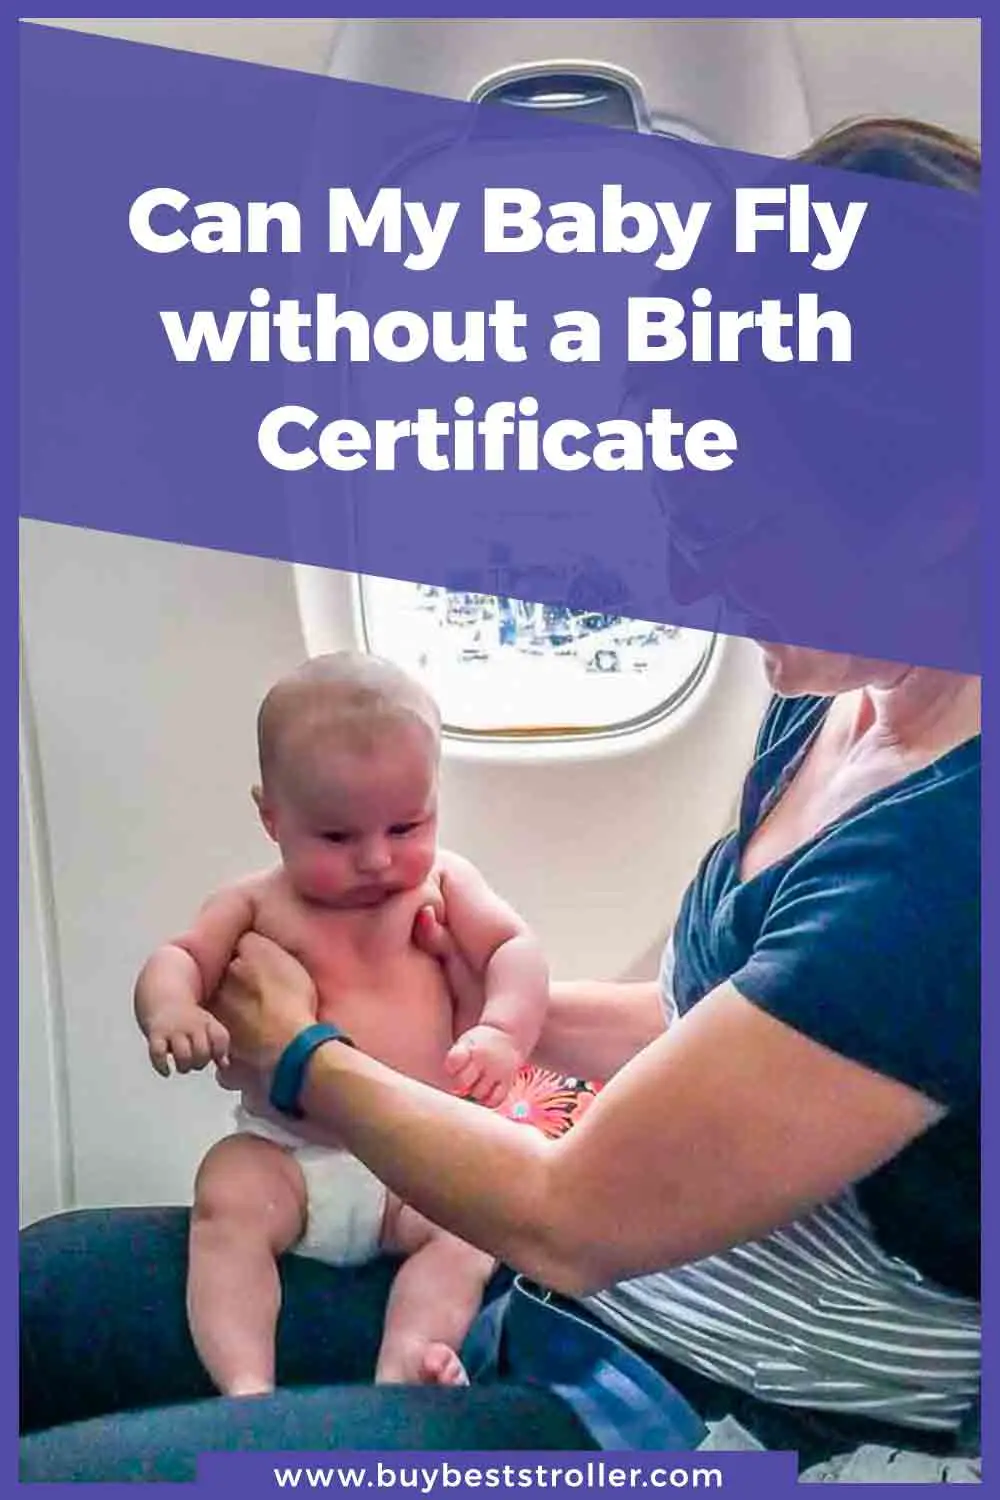 Can-My-Baby-Fly-without-a-Birth-Certificate